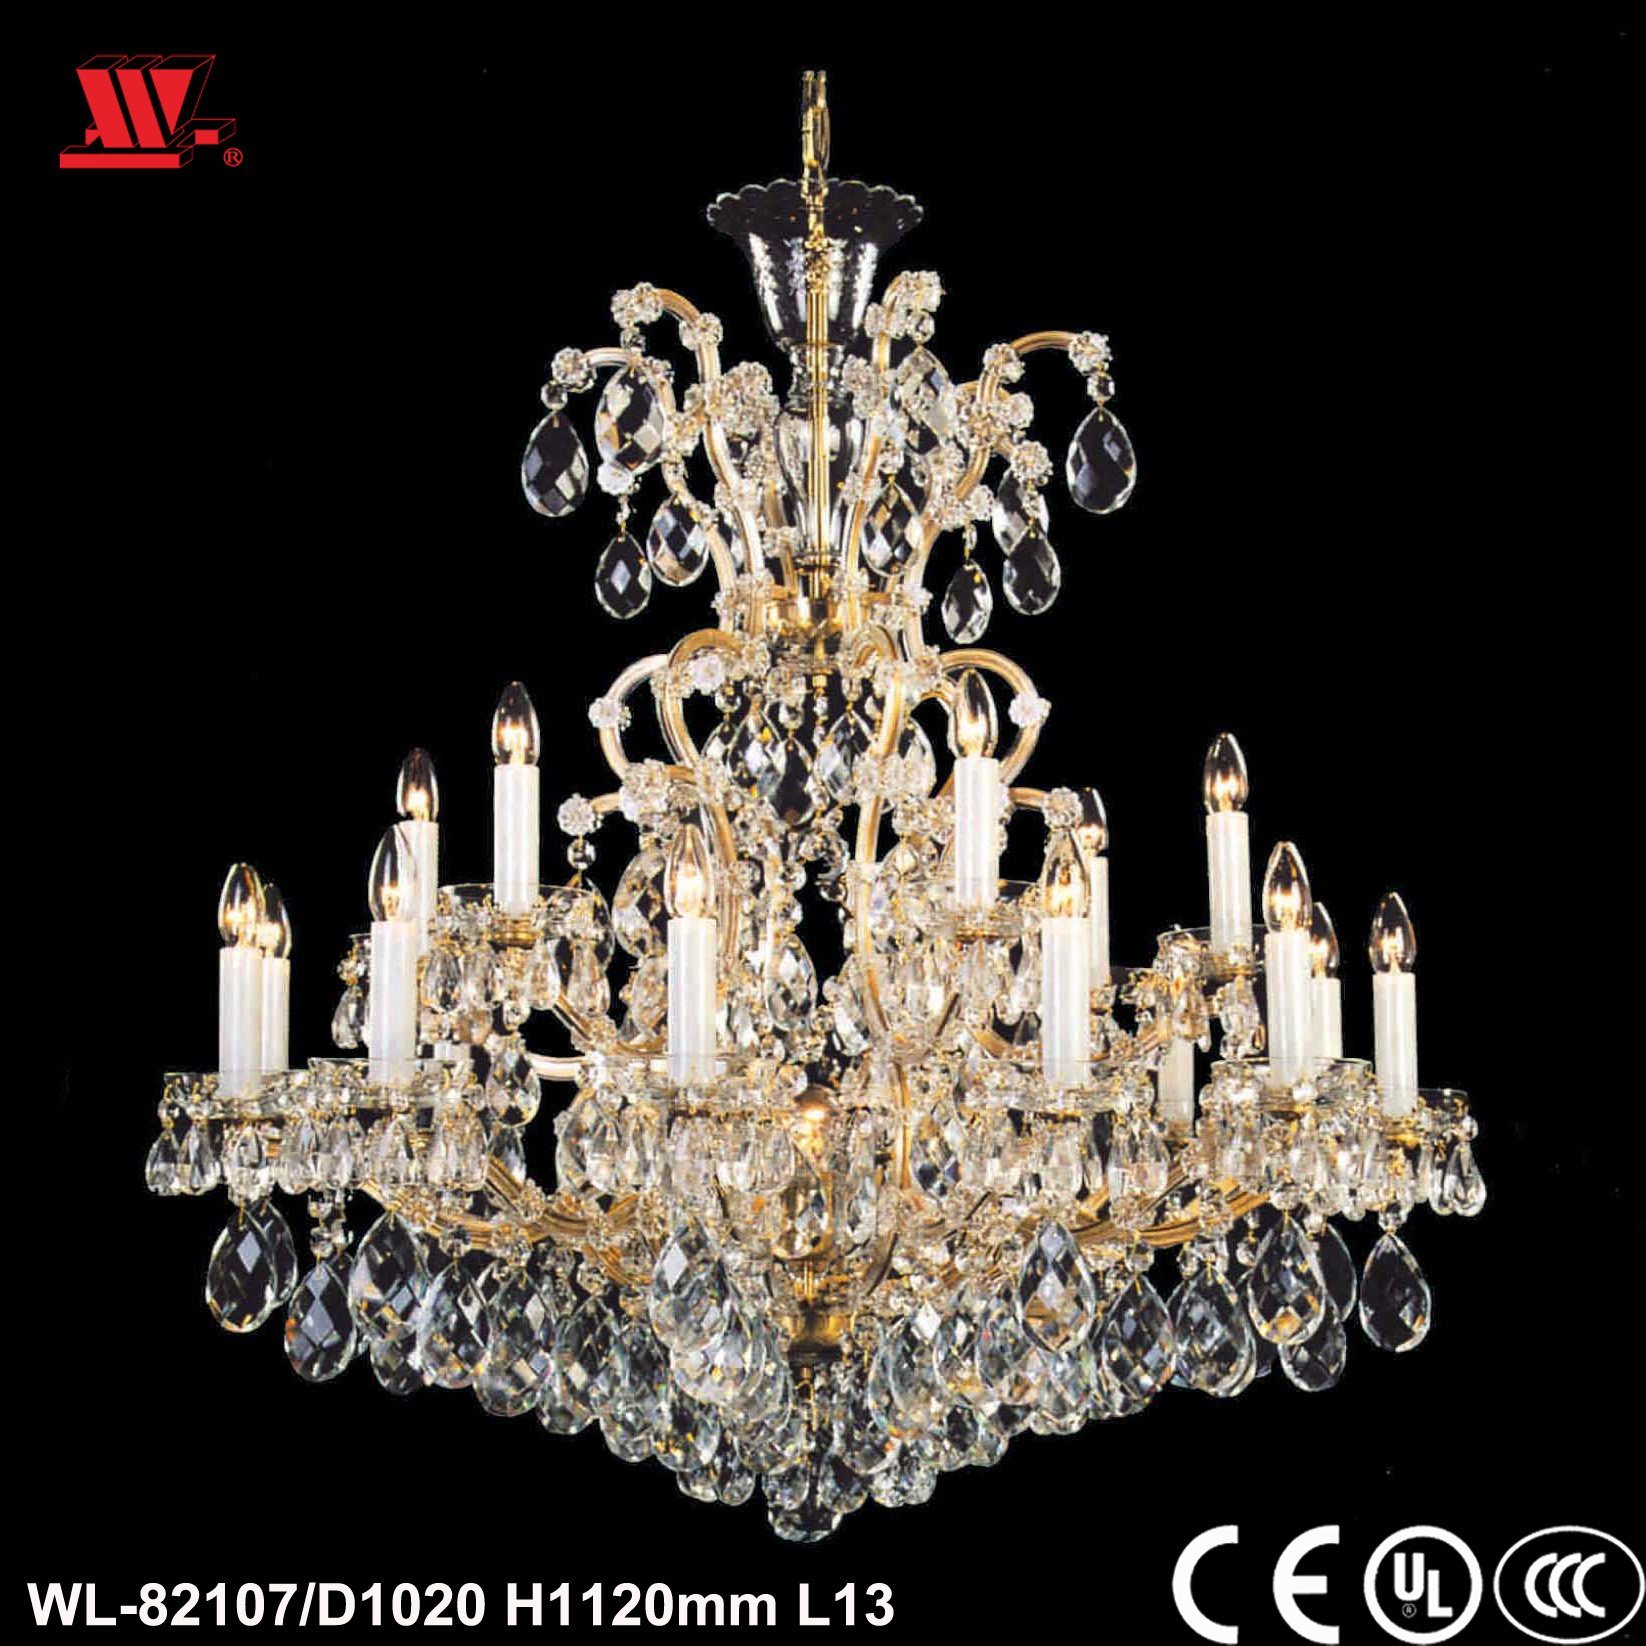 Crystal Chandelier with Glass Chains Wl-82107